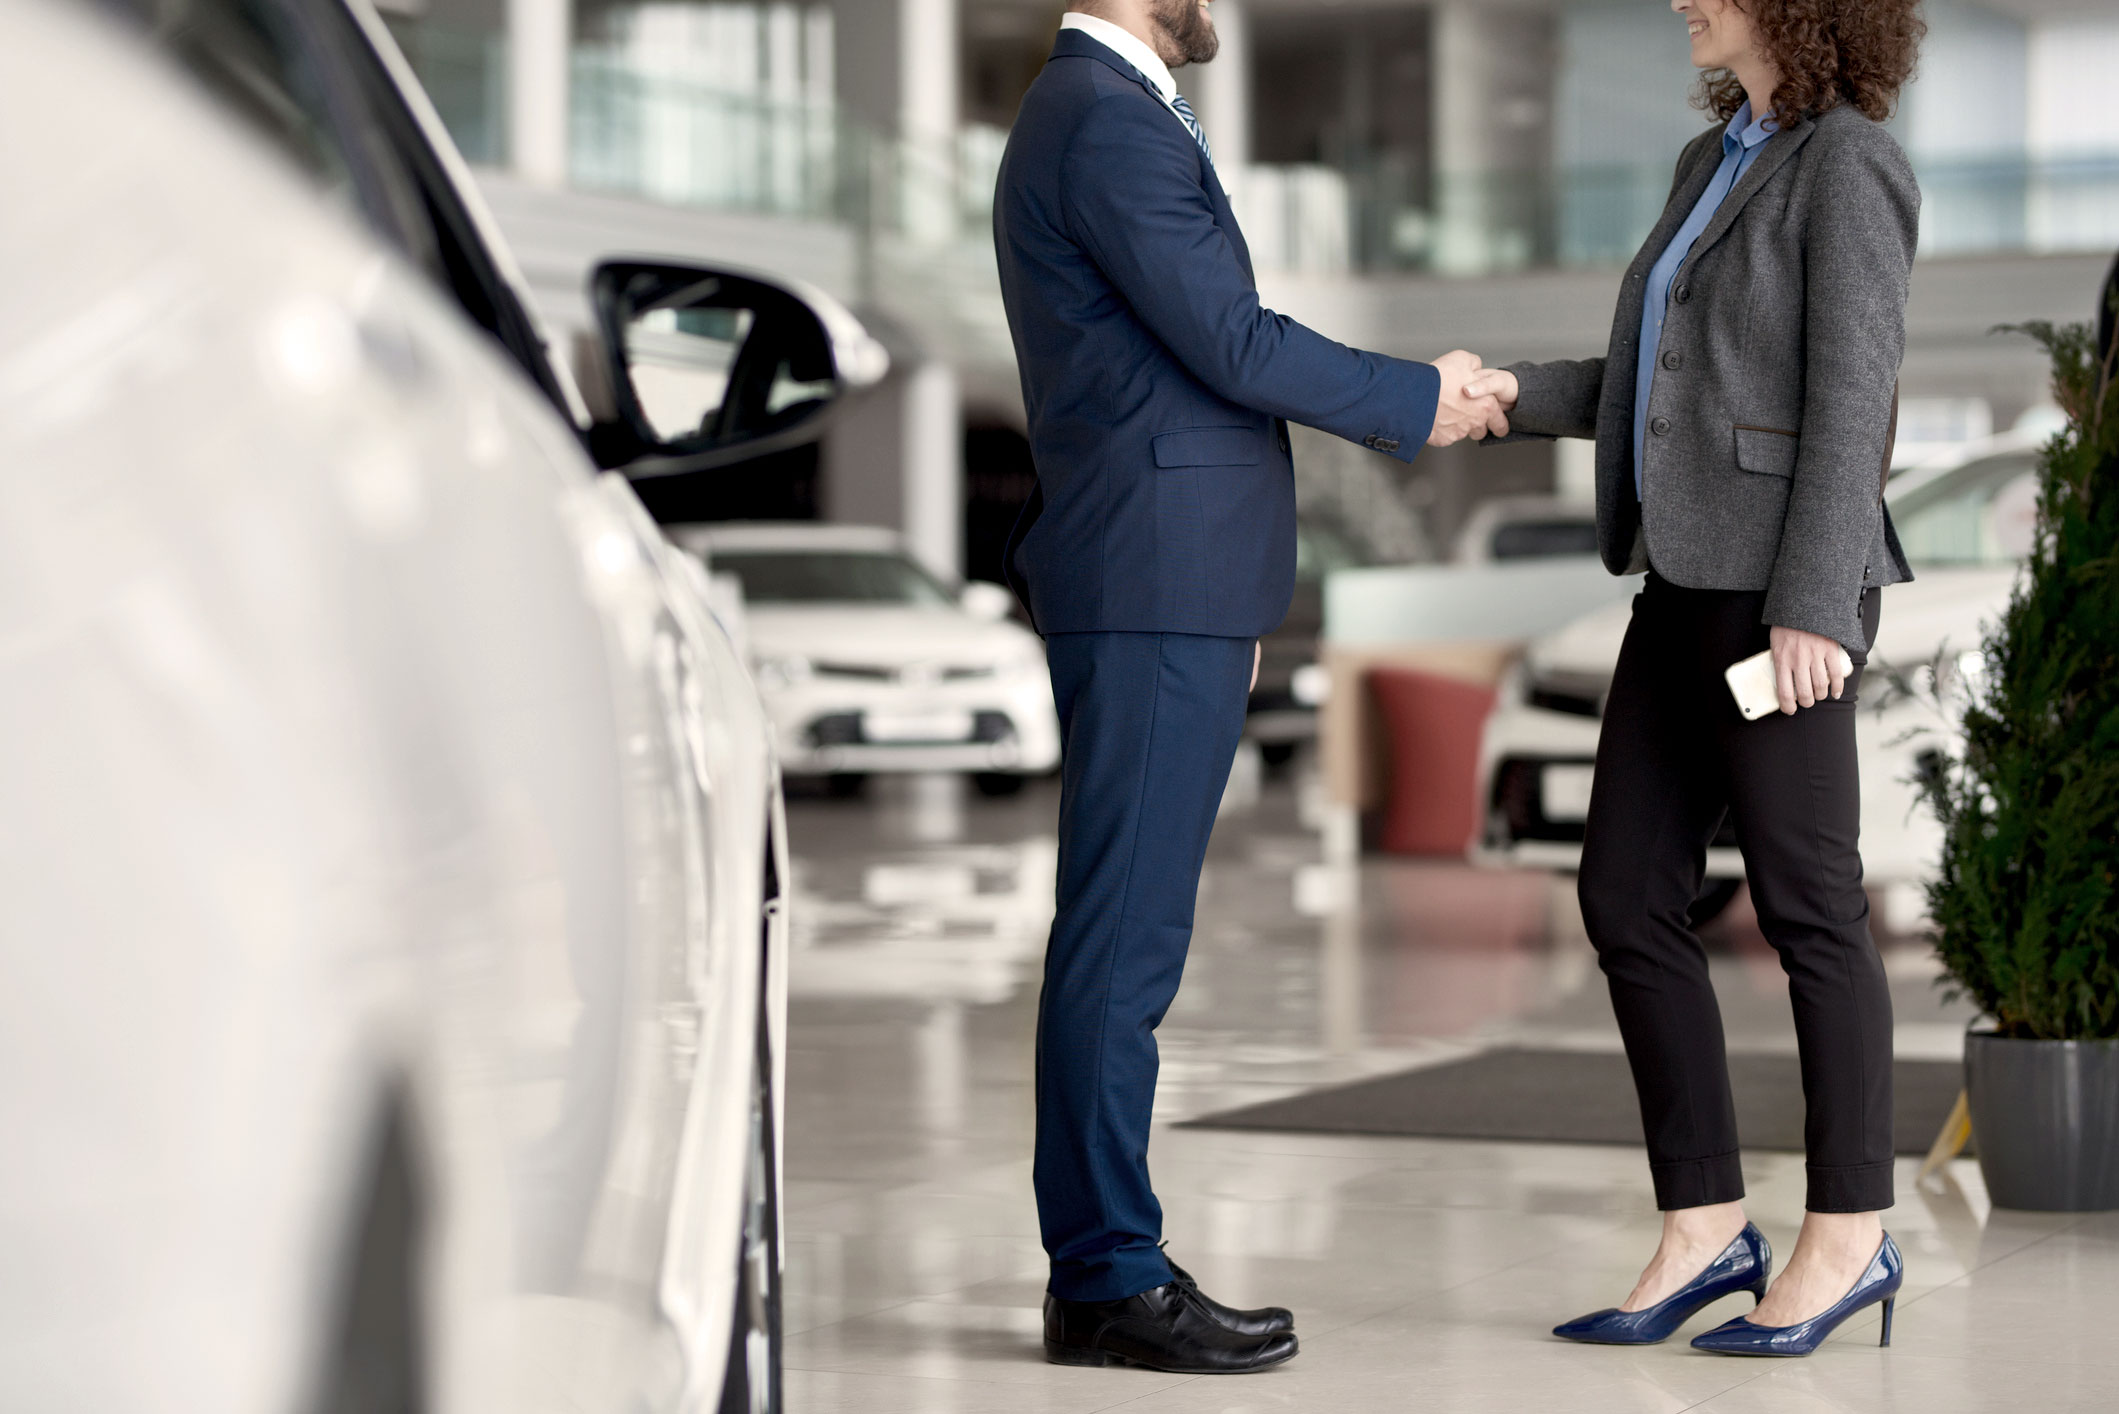 How Can Dealerships and A Direct-to-Consumer Approach Coexist? / Blogs / Perficient